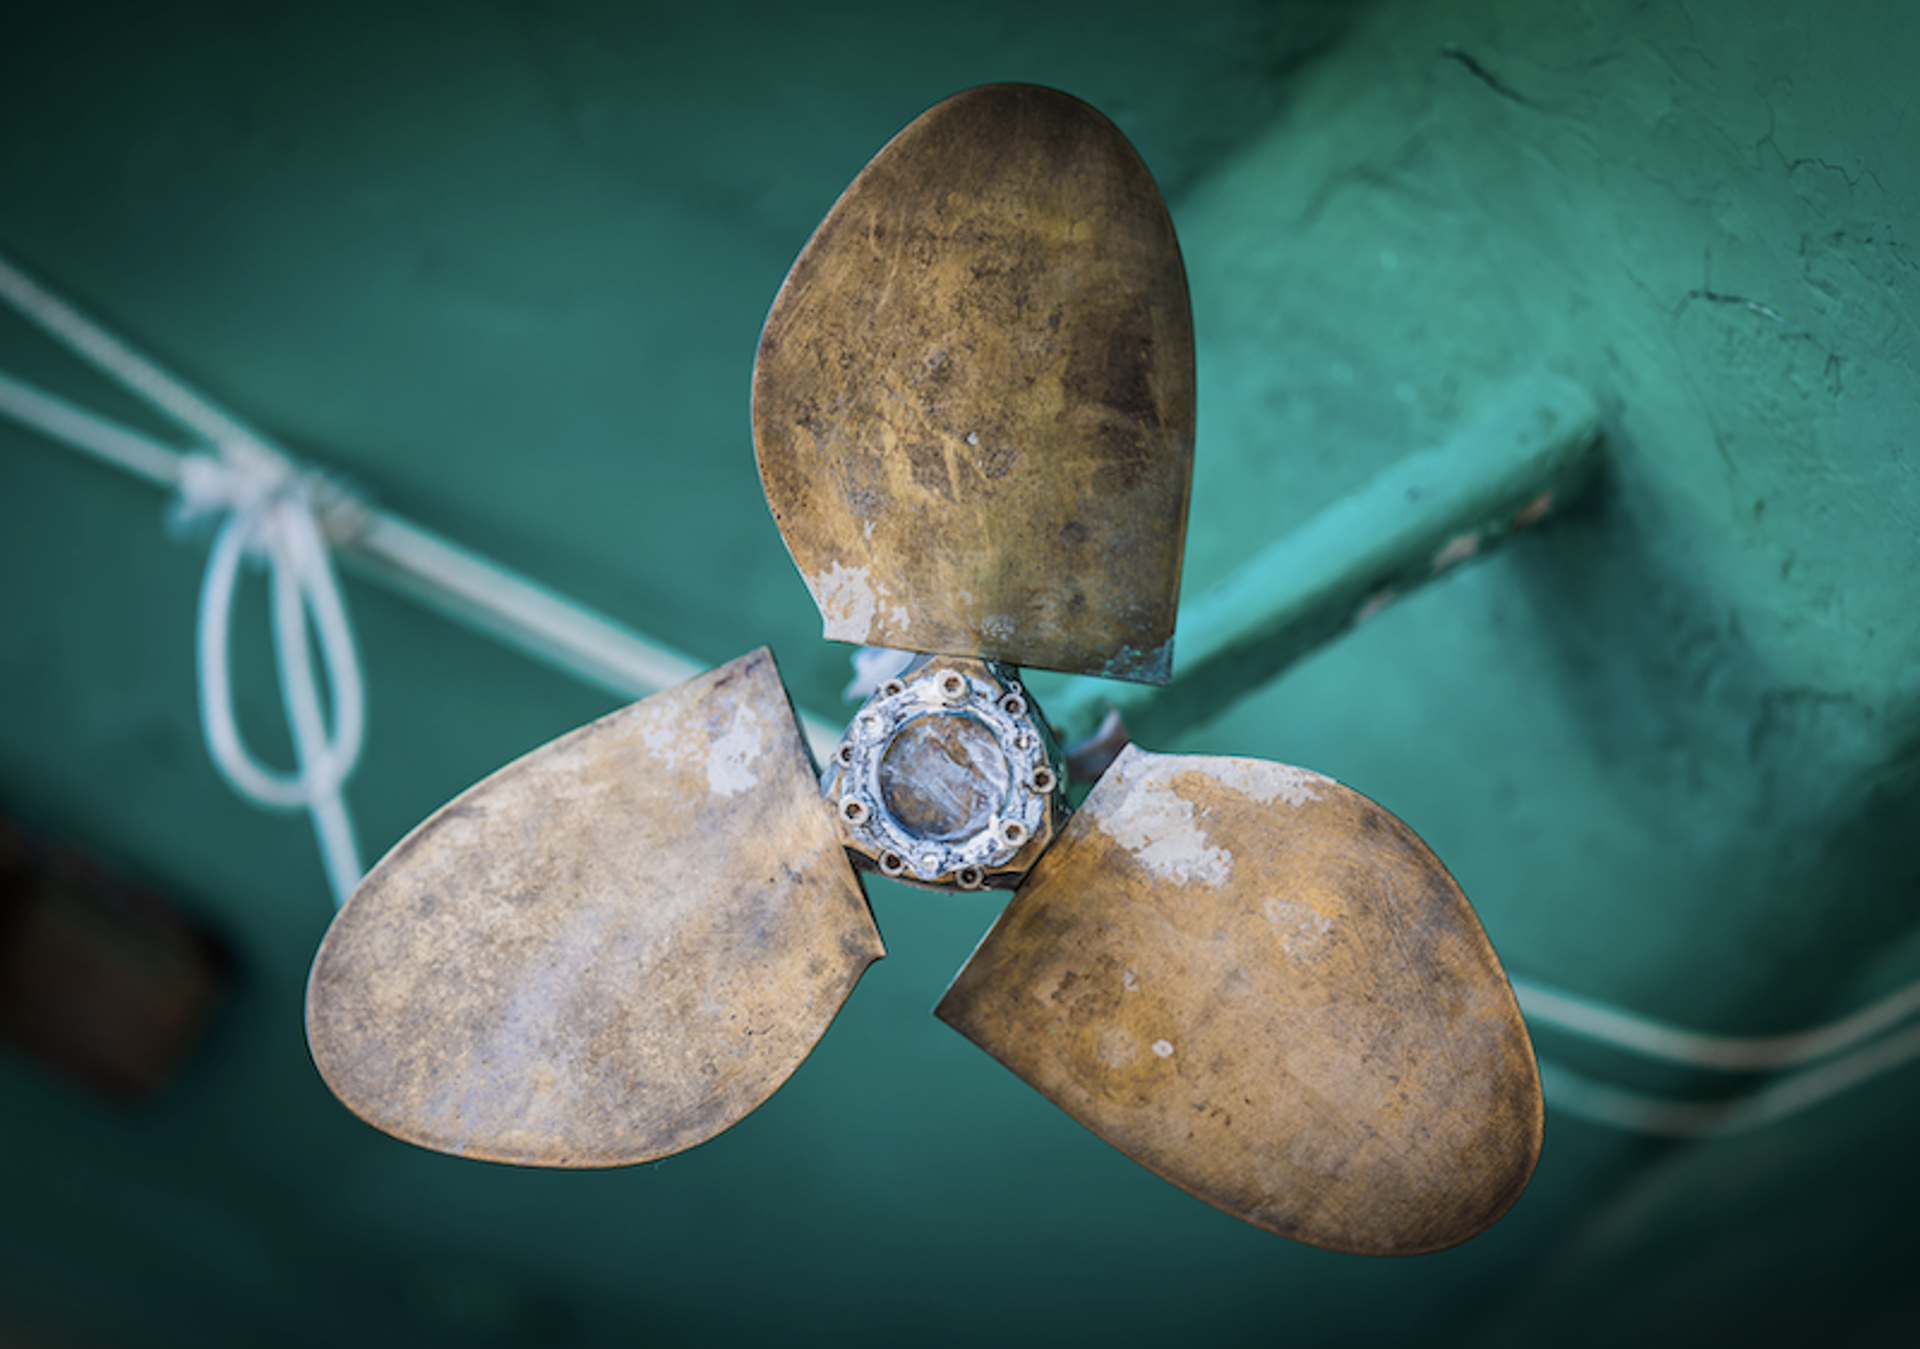 Corroded Propeller IV by Peter Mendelson